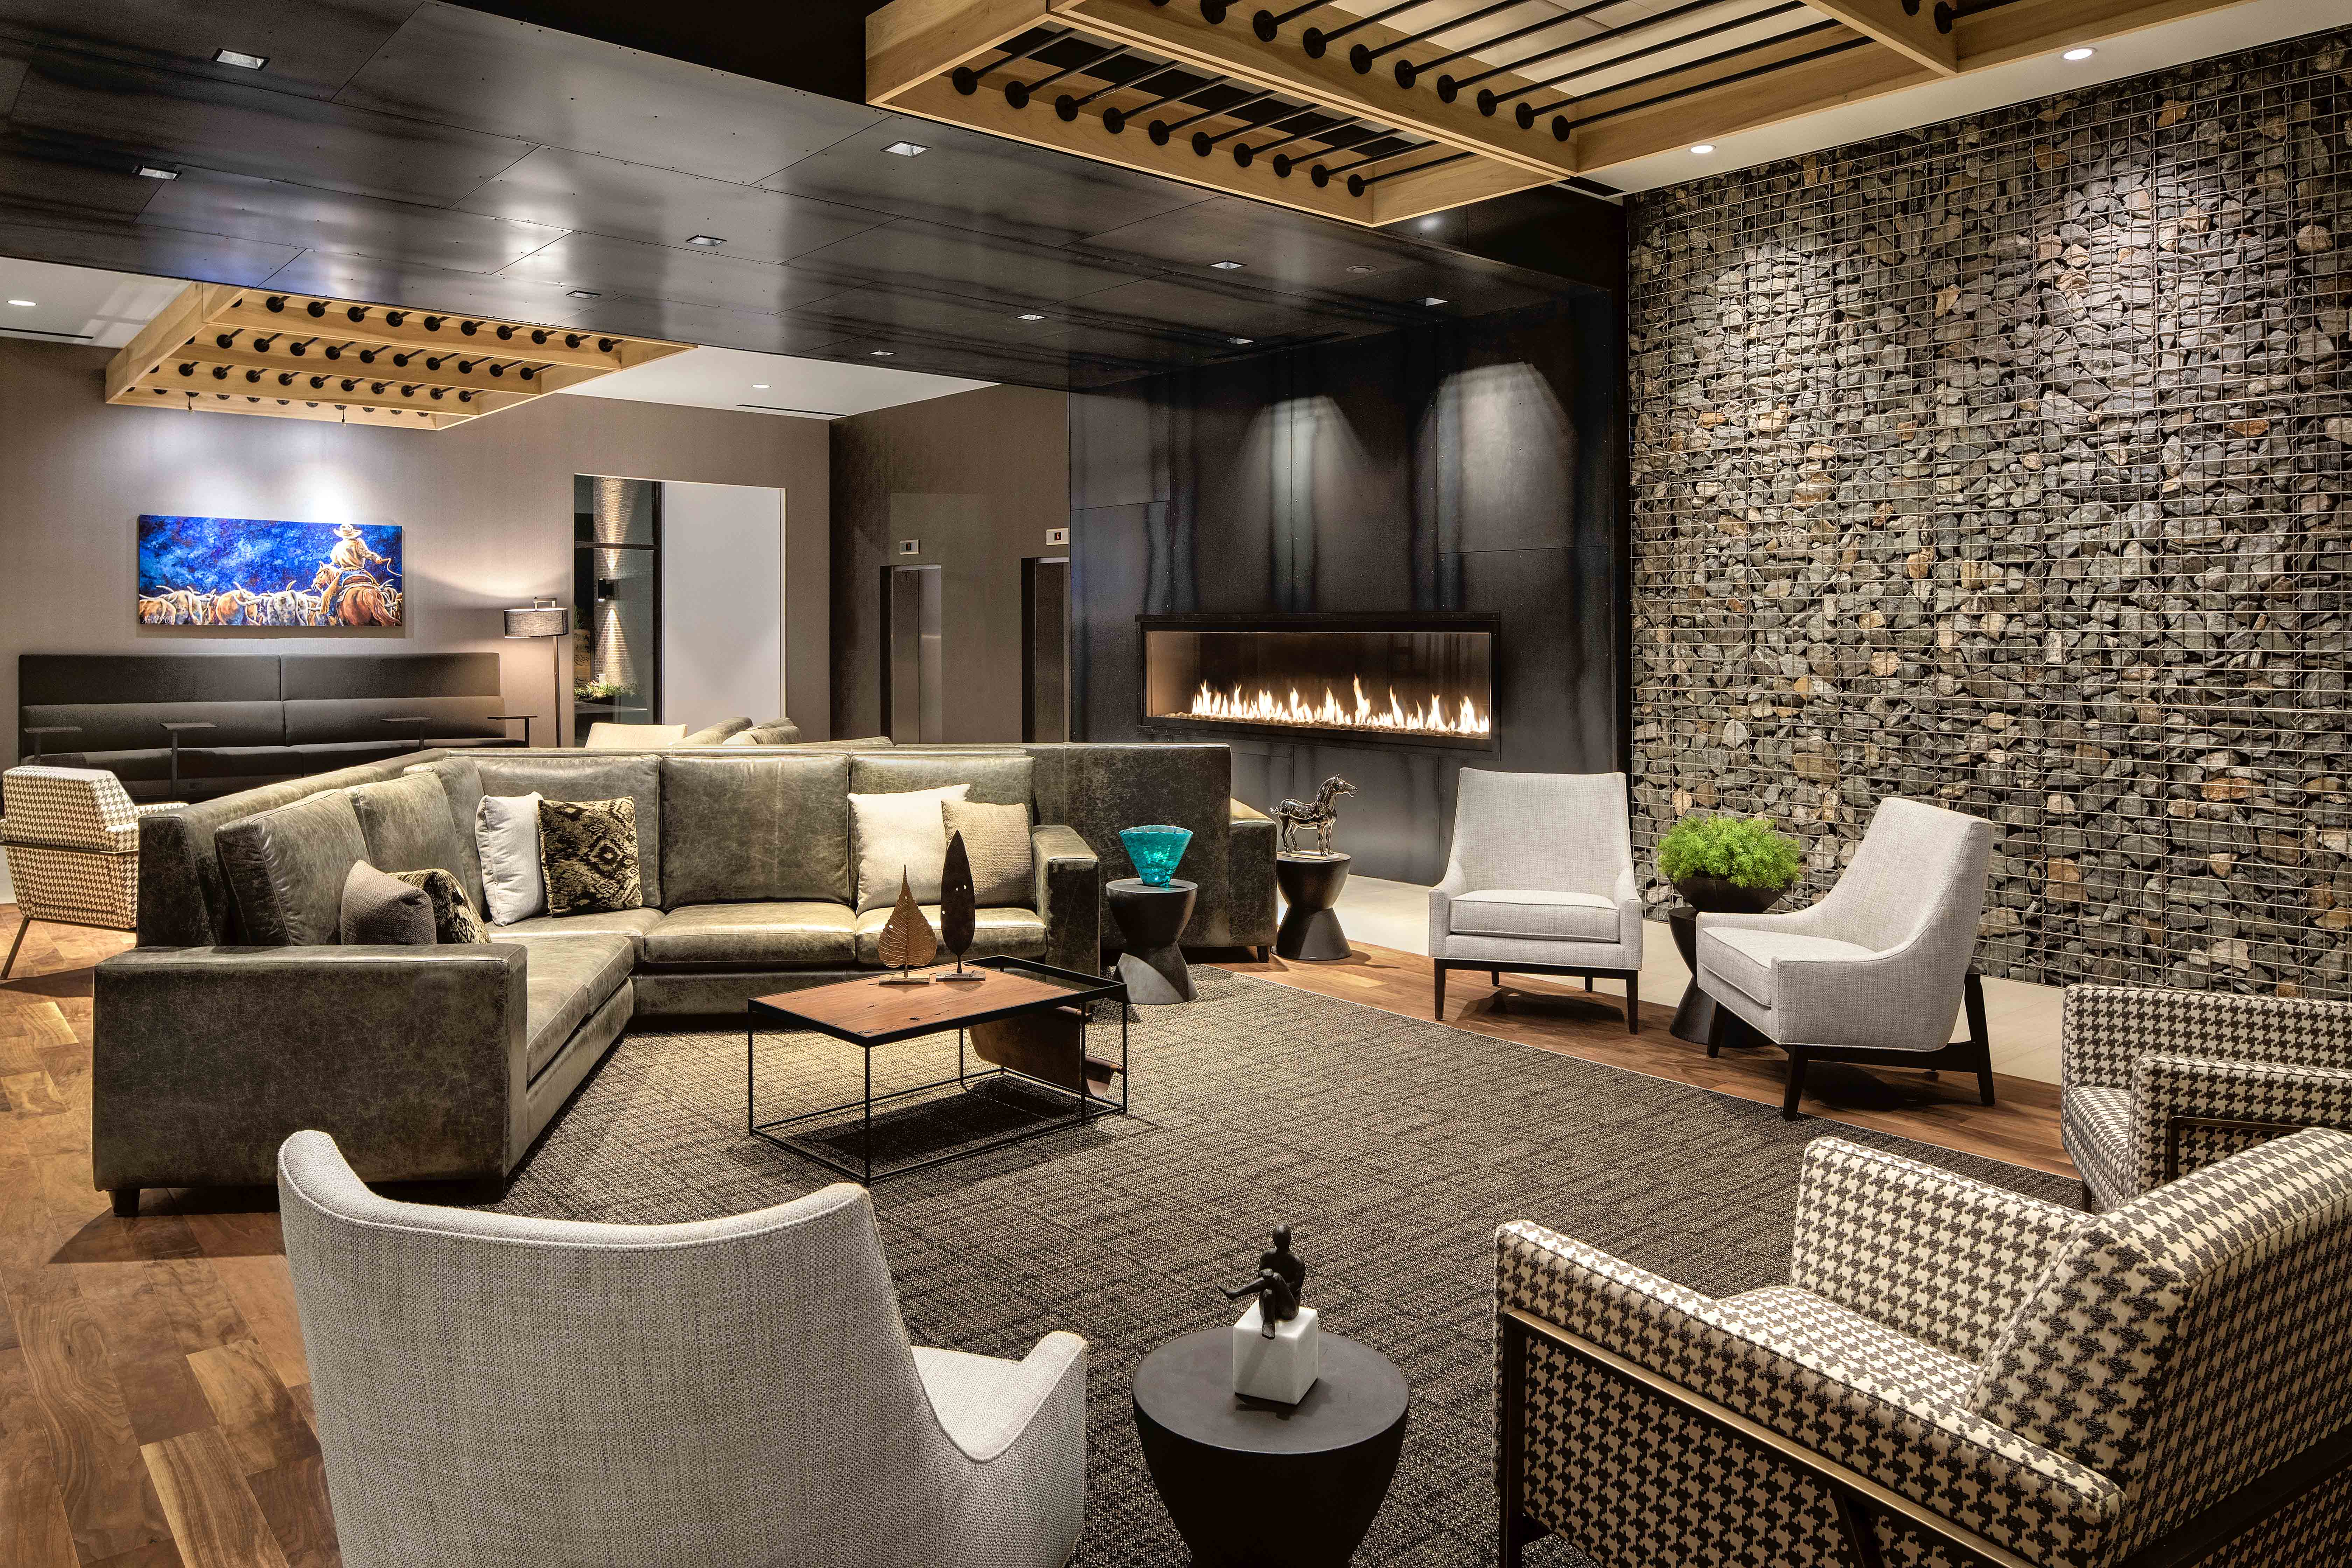 Lobby Area with Soft Seating and Fireplace